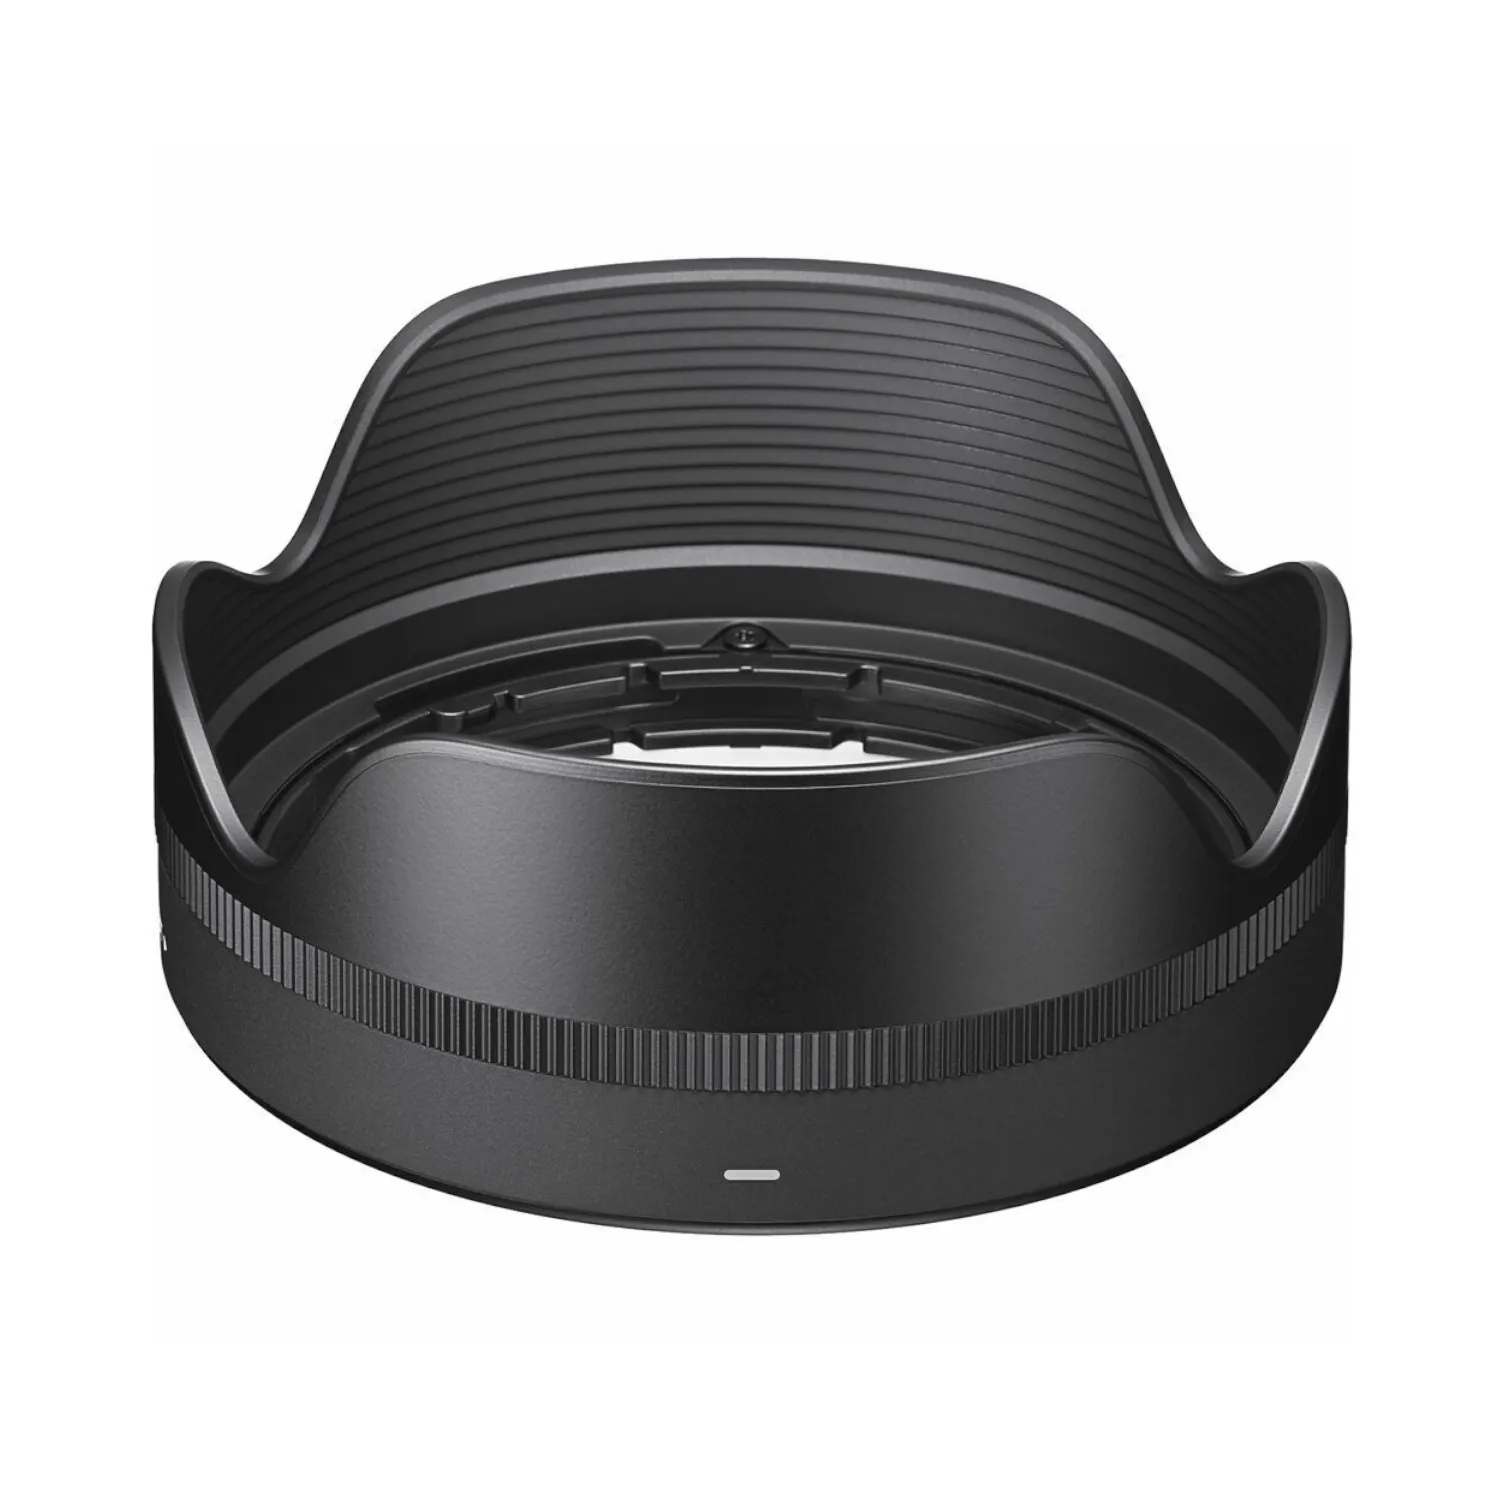 Sigma LH582-02 Lens Hood for 18-50mm f/2.8 DC DN Contemporary Lens